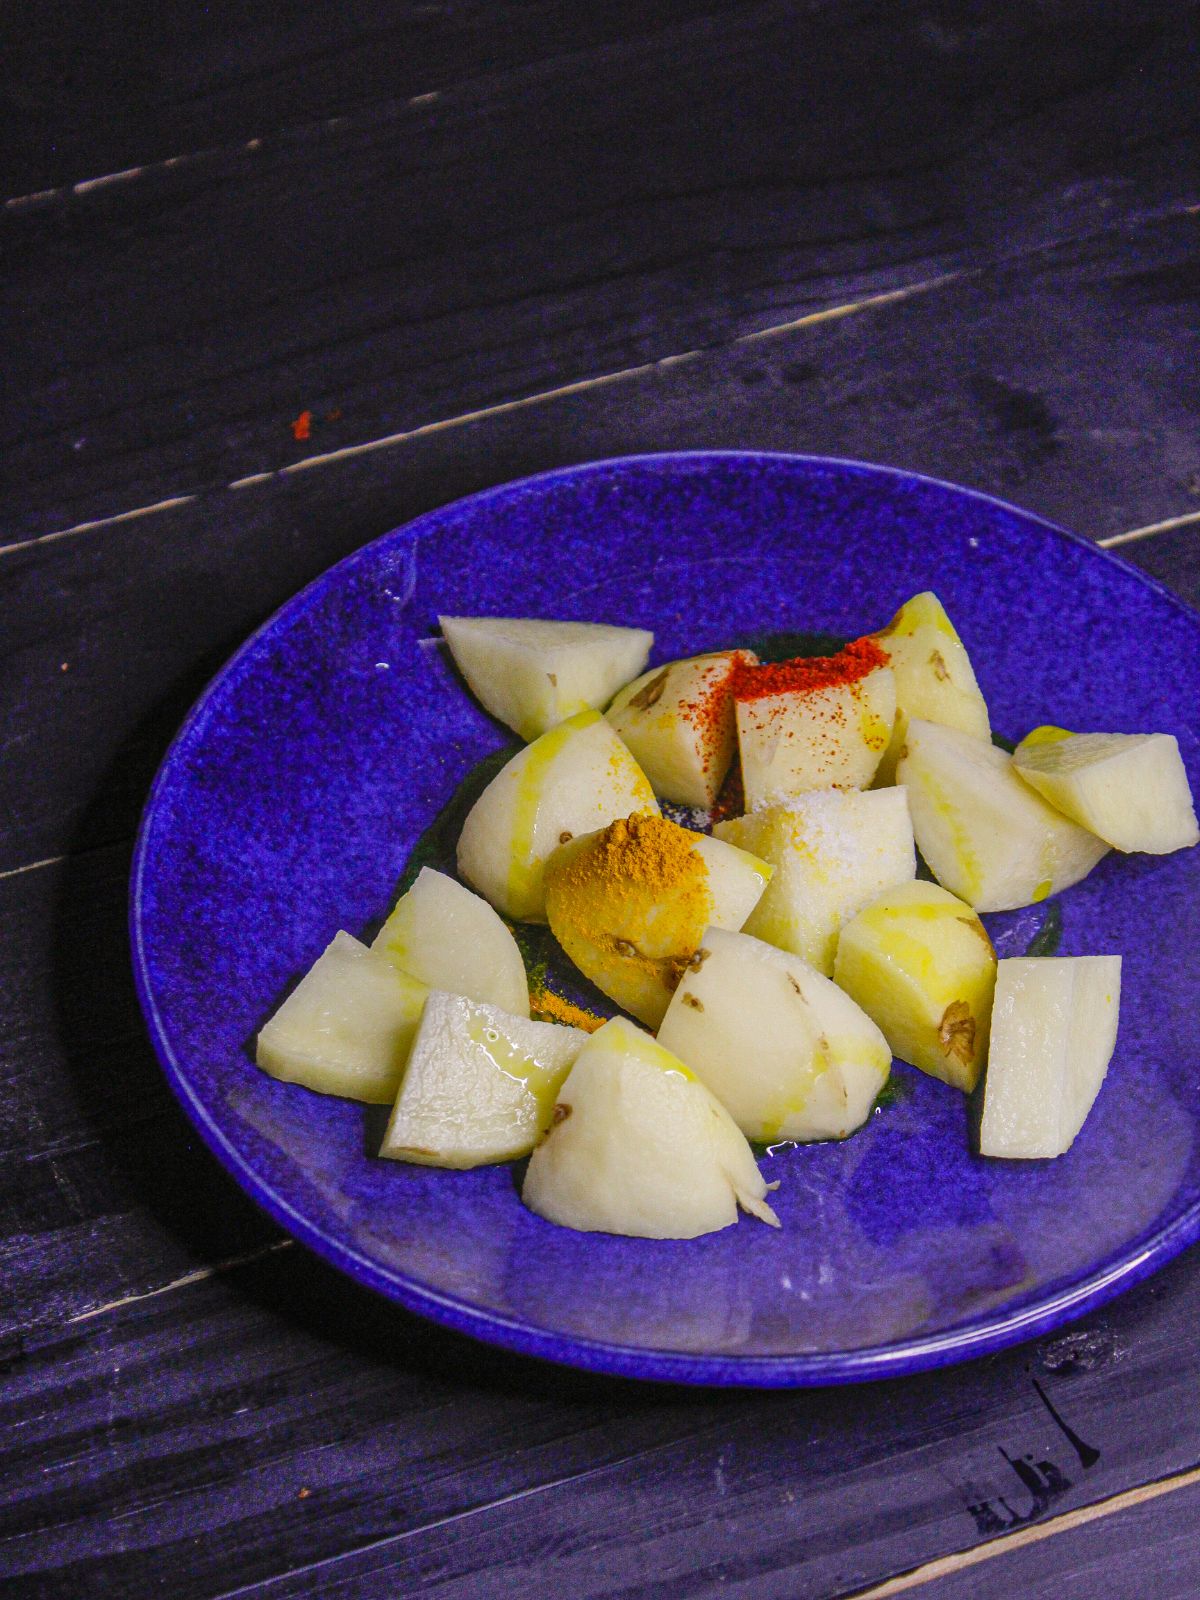 Take cubed potatoes on a plate and marinate it with powdered spices 